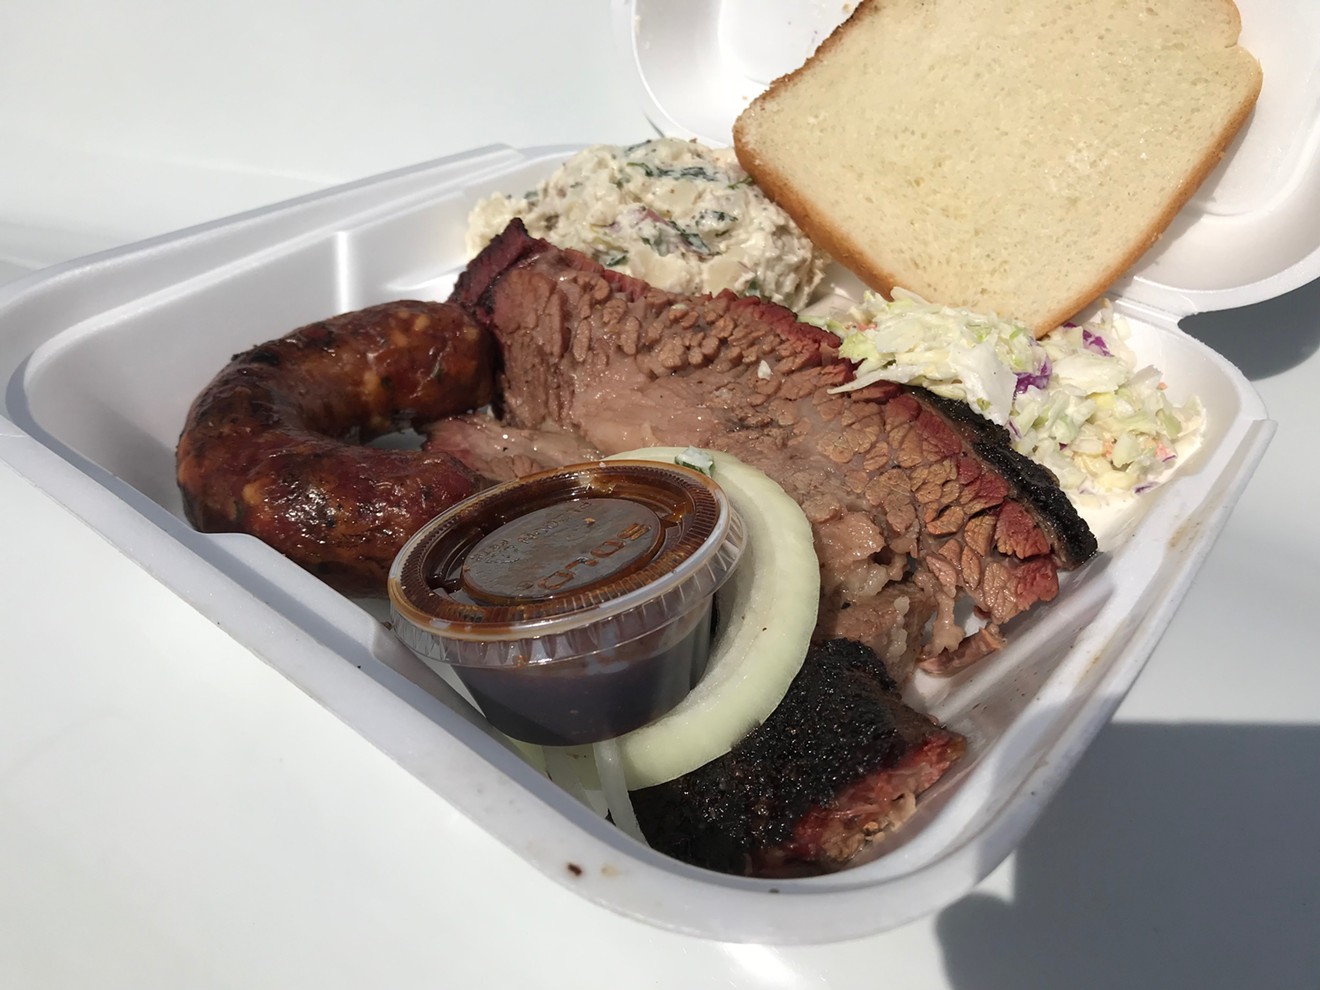 We care not that we're eating from a Styrofoam tray — this brisket and sausage are absolutely killer.